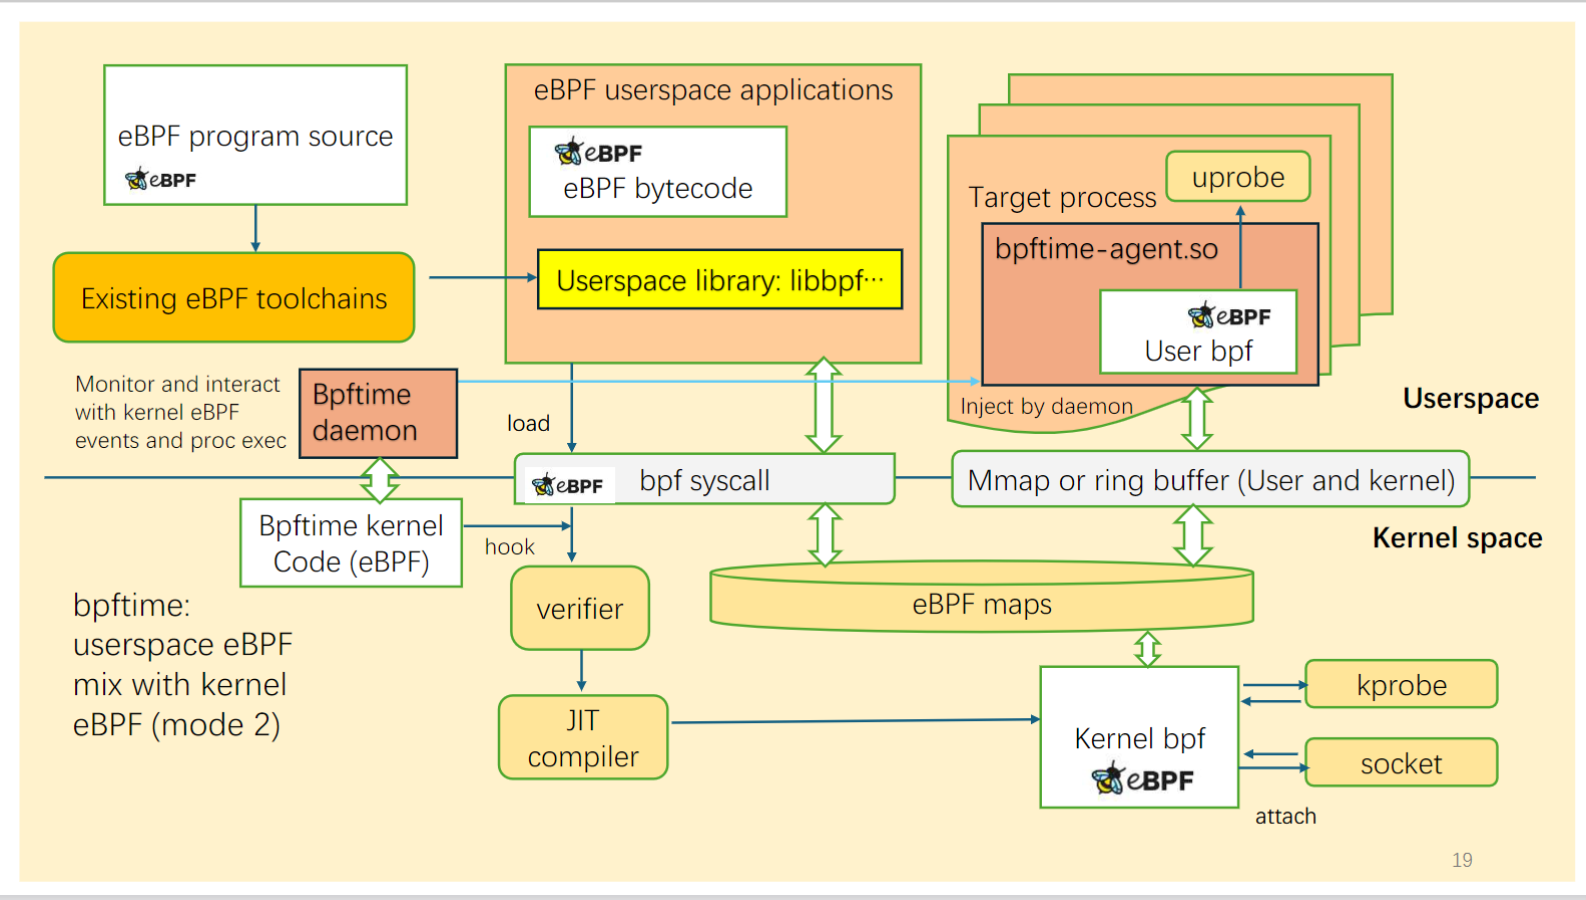 How it works with kernel eBPF